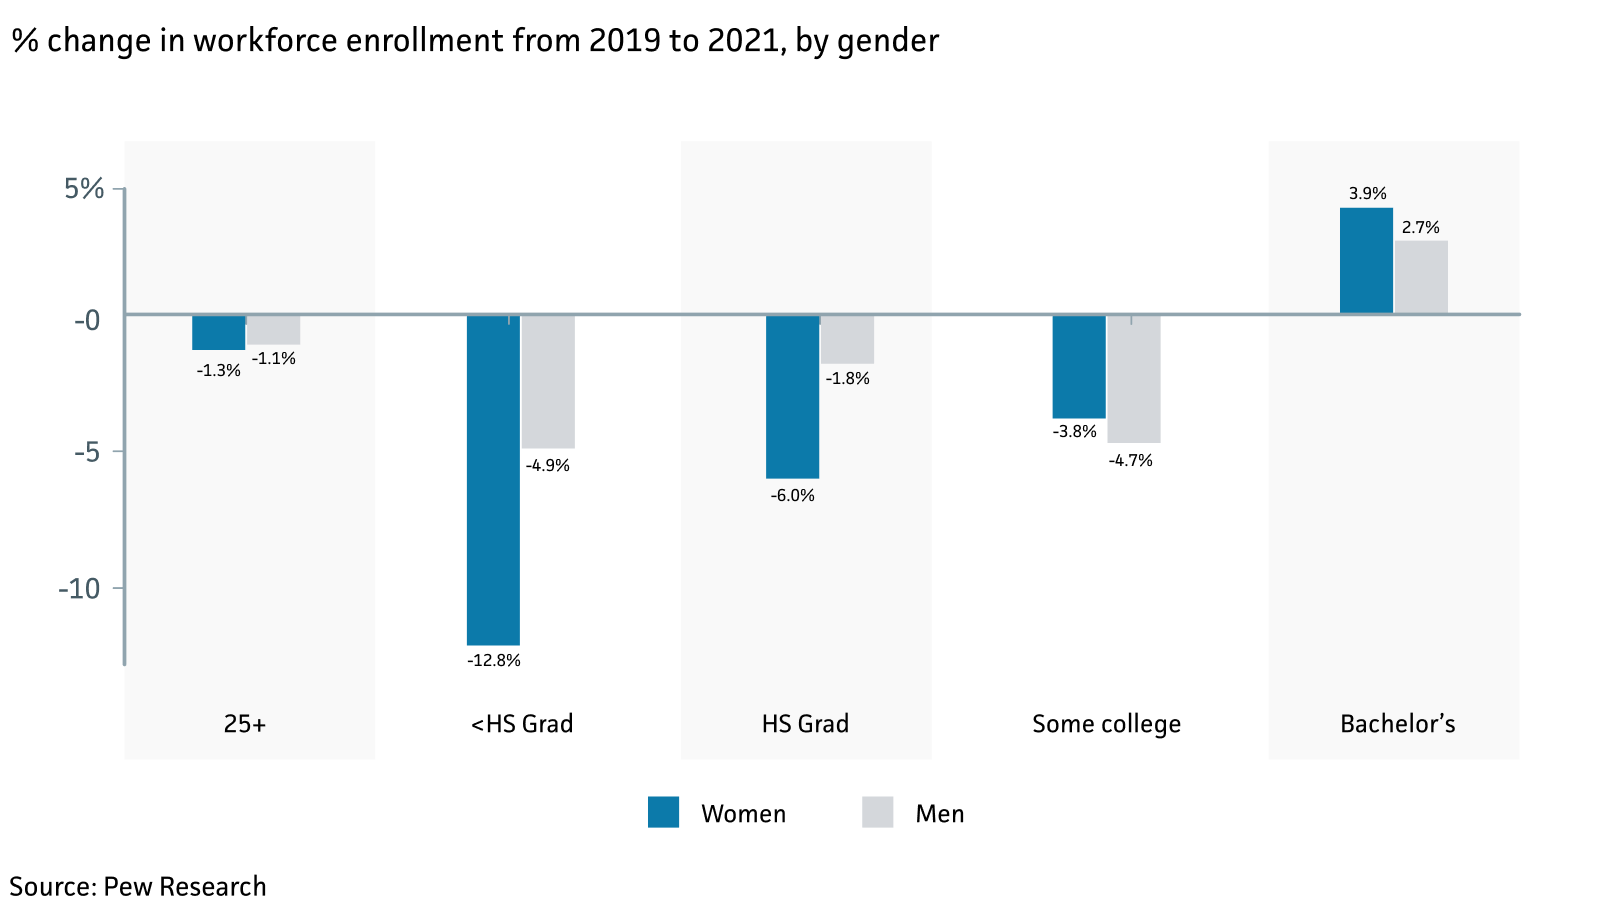 There are 1.3% less women aged 25 or older in the workforce, and those with high-school degrees were more likely to leave the workforce than their college-graduate counterparts. Compared to their male counterparts — who saw a 1.8% decrease in the workforce — there are 6% less high-school-educated working women in 2021 compared to 2019. The difference is more drastic when comparing women and men who are not high school graduates, which saw a 12.8% and 4.9% decrease, respectively.